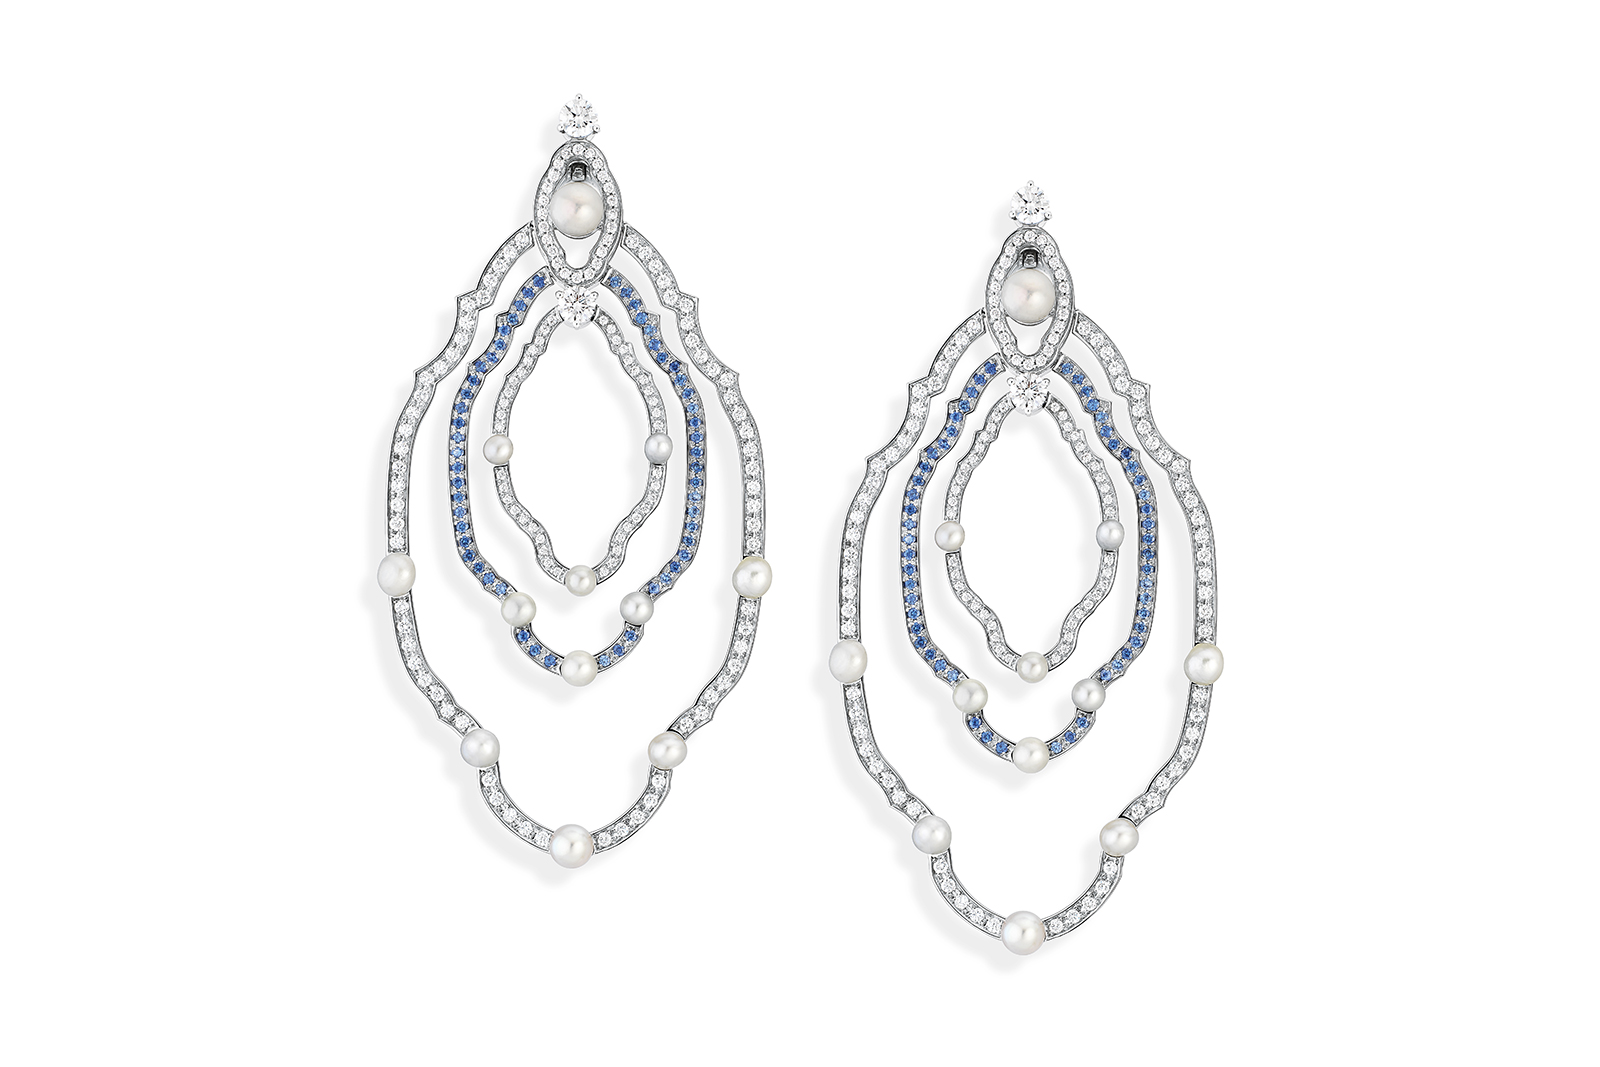 Mellerio dits Meller transformable ‘Madre Perla' earrings in pearls, diamonds and sapphires with detachable elements